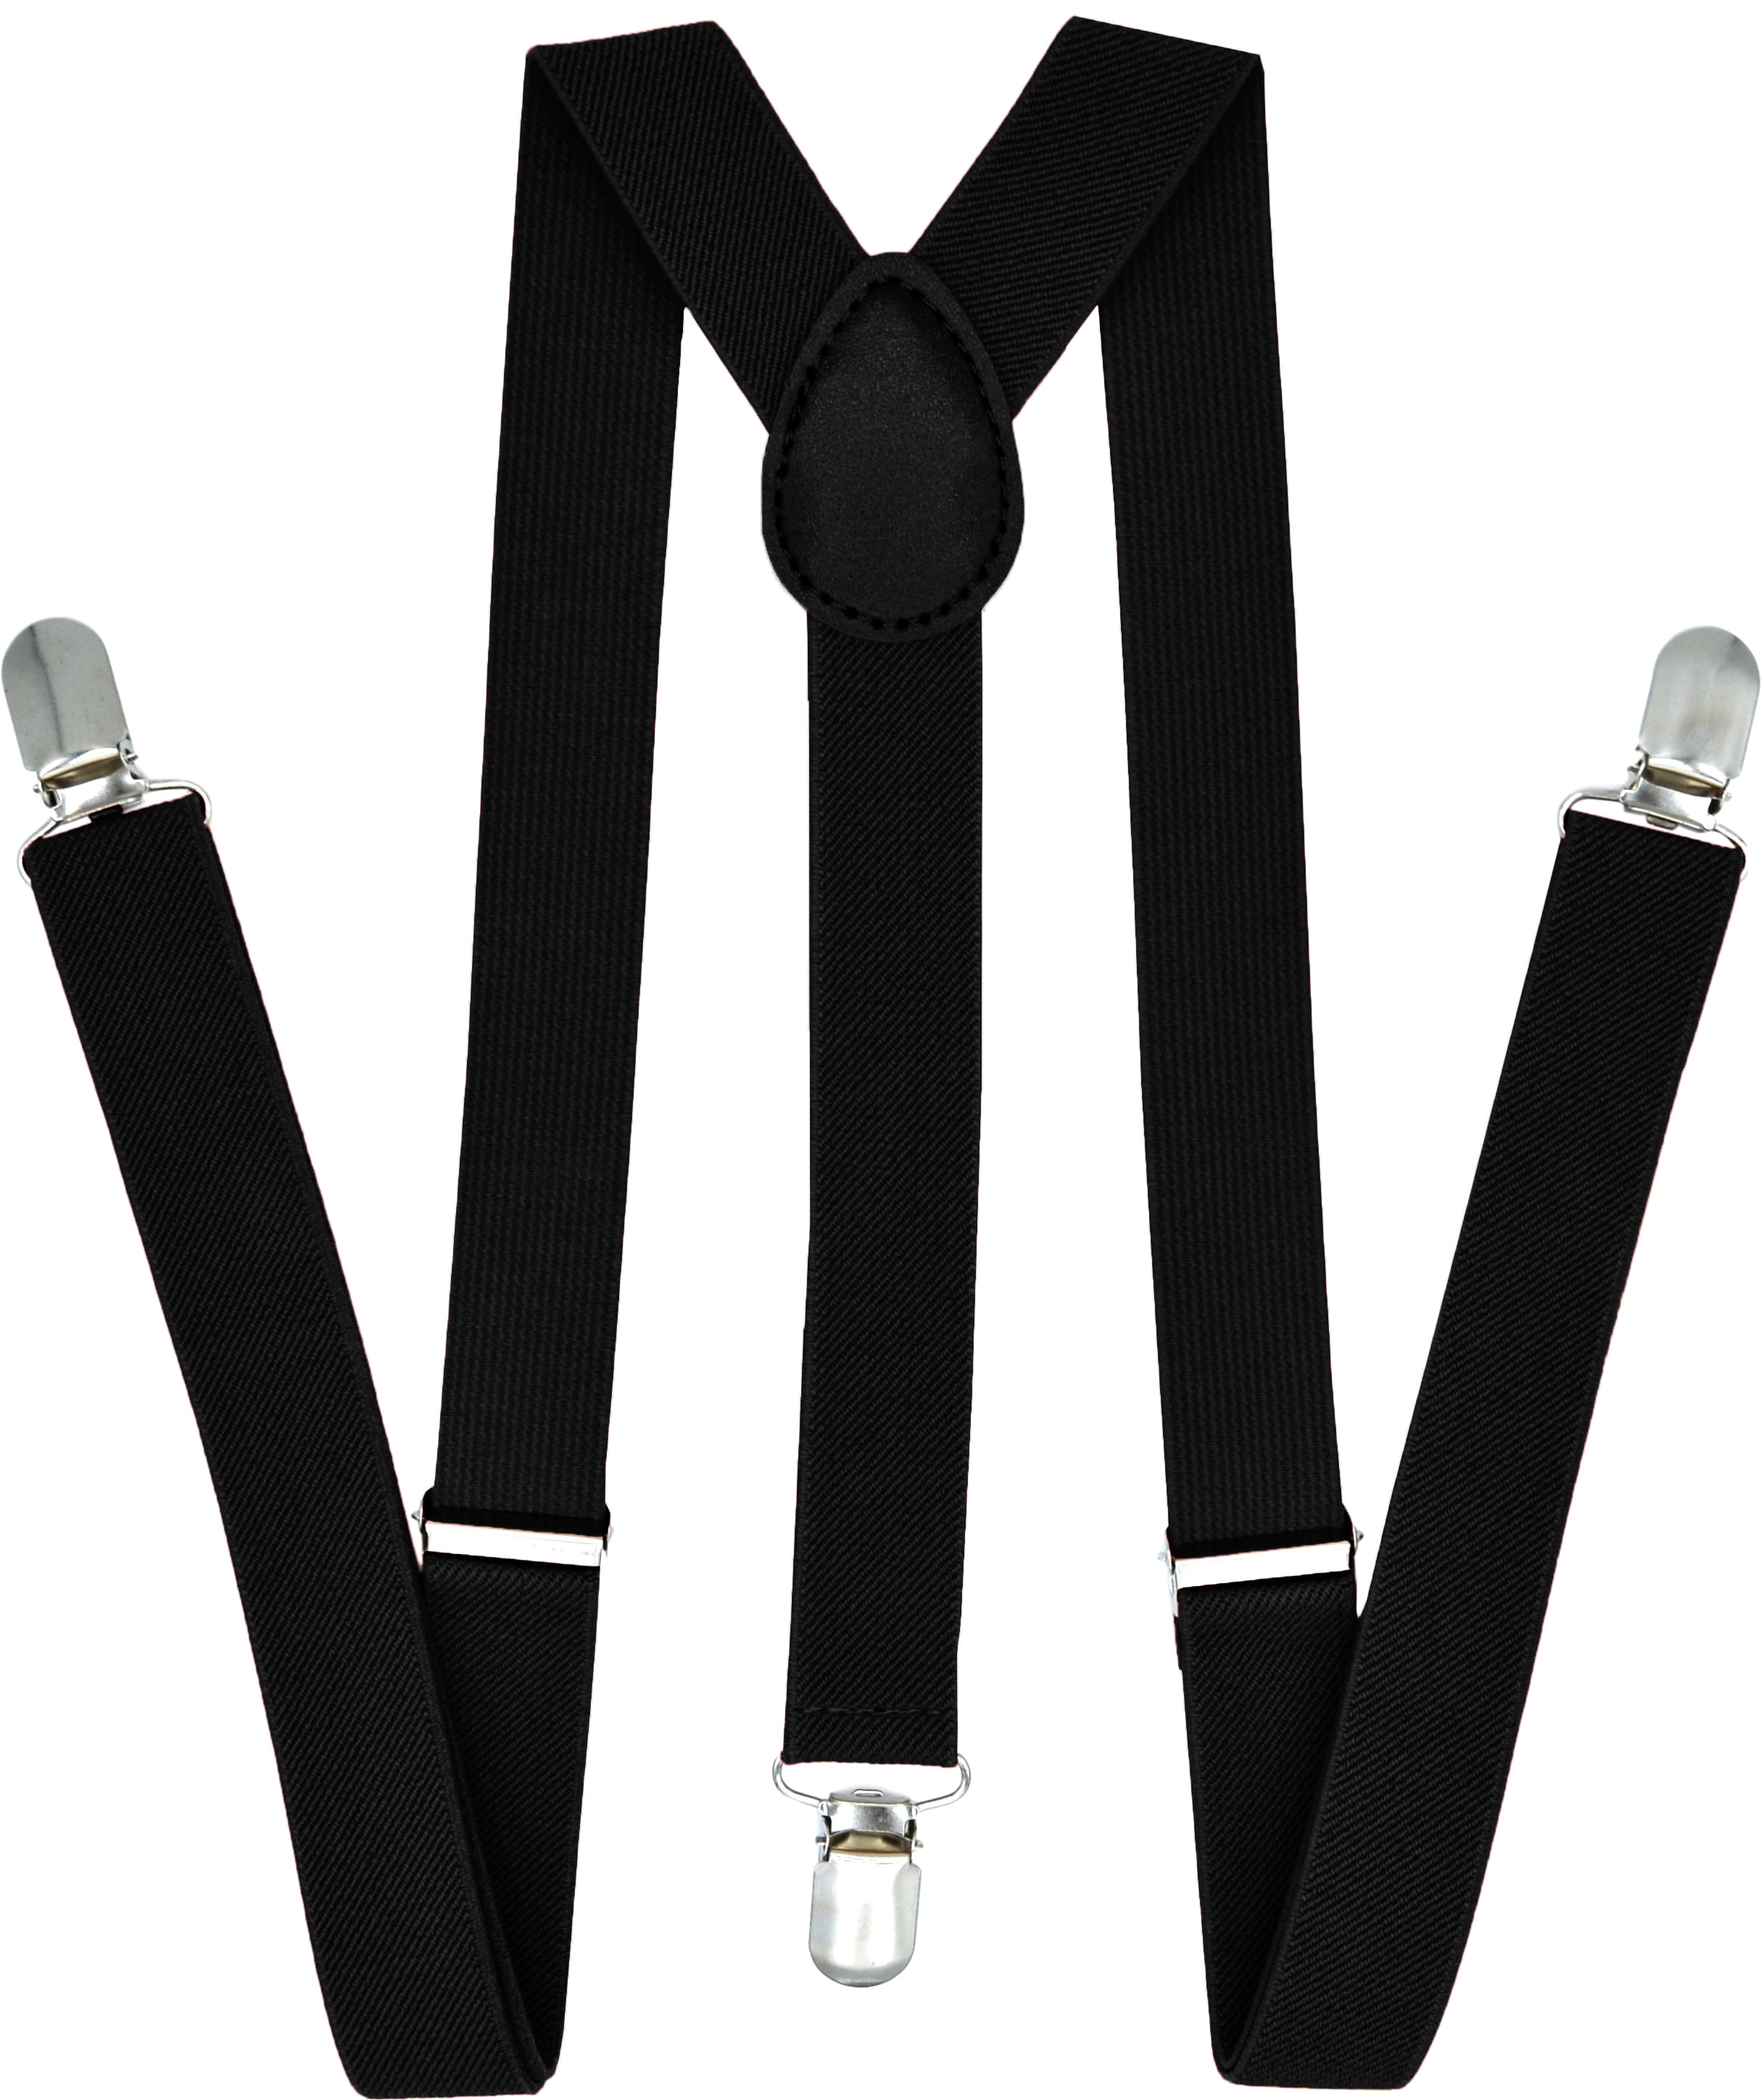 Suspenders Strong Heavy Duty with Adjustable Y Shaped Clips AINOW Men Women Unisex Trouser Braces